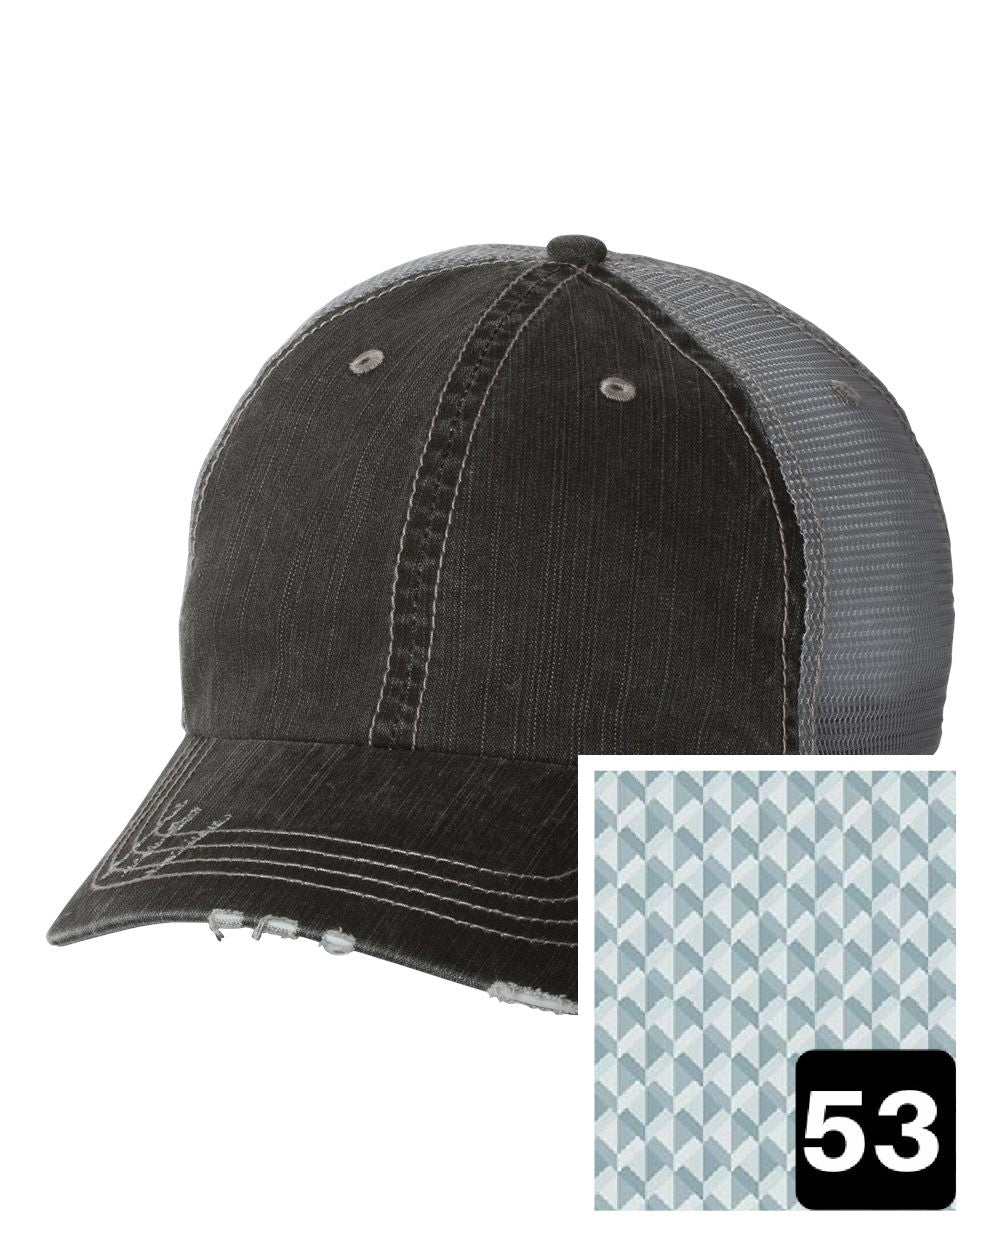 gray distressed trucker hat with multi-color stripe fabric state of Minnesota